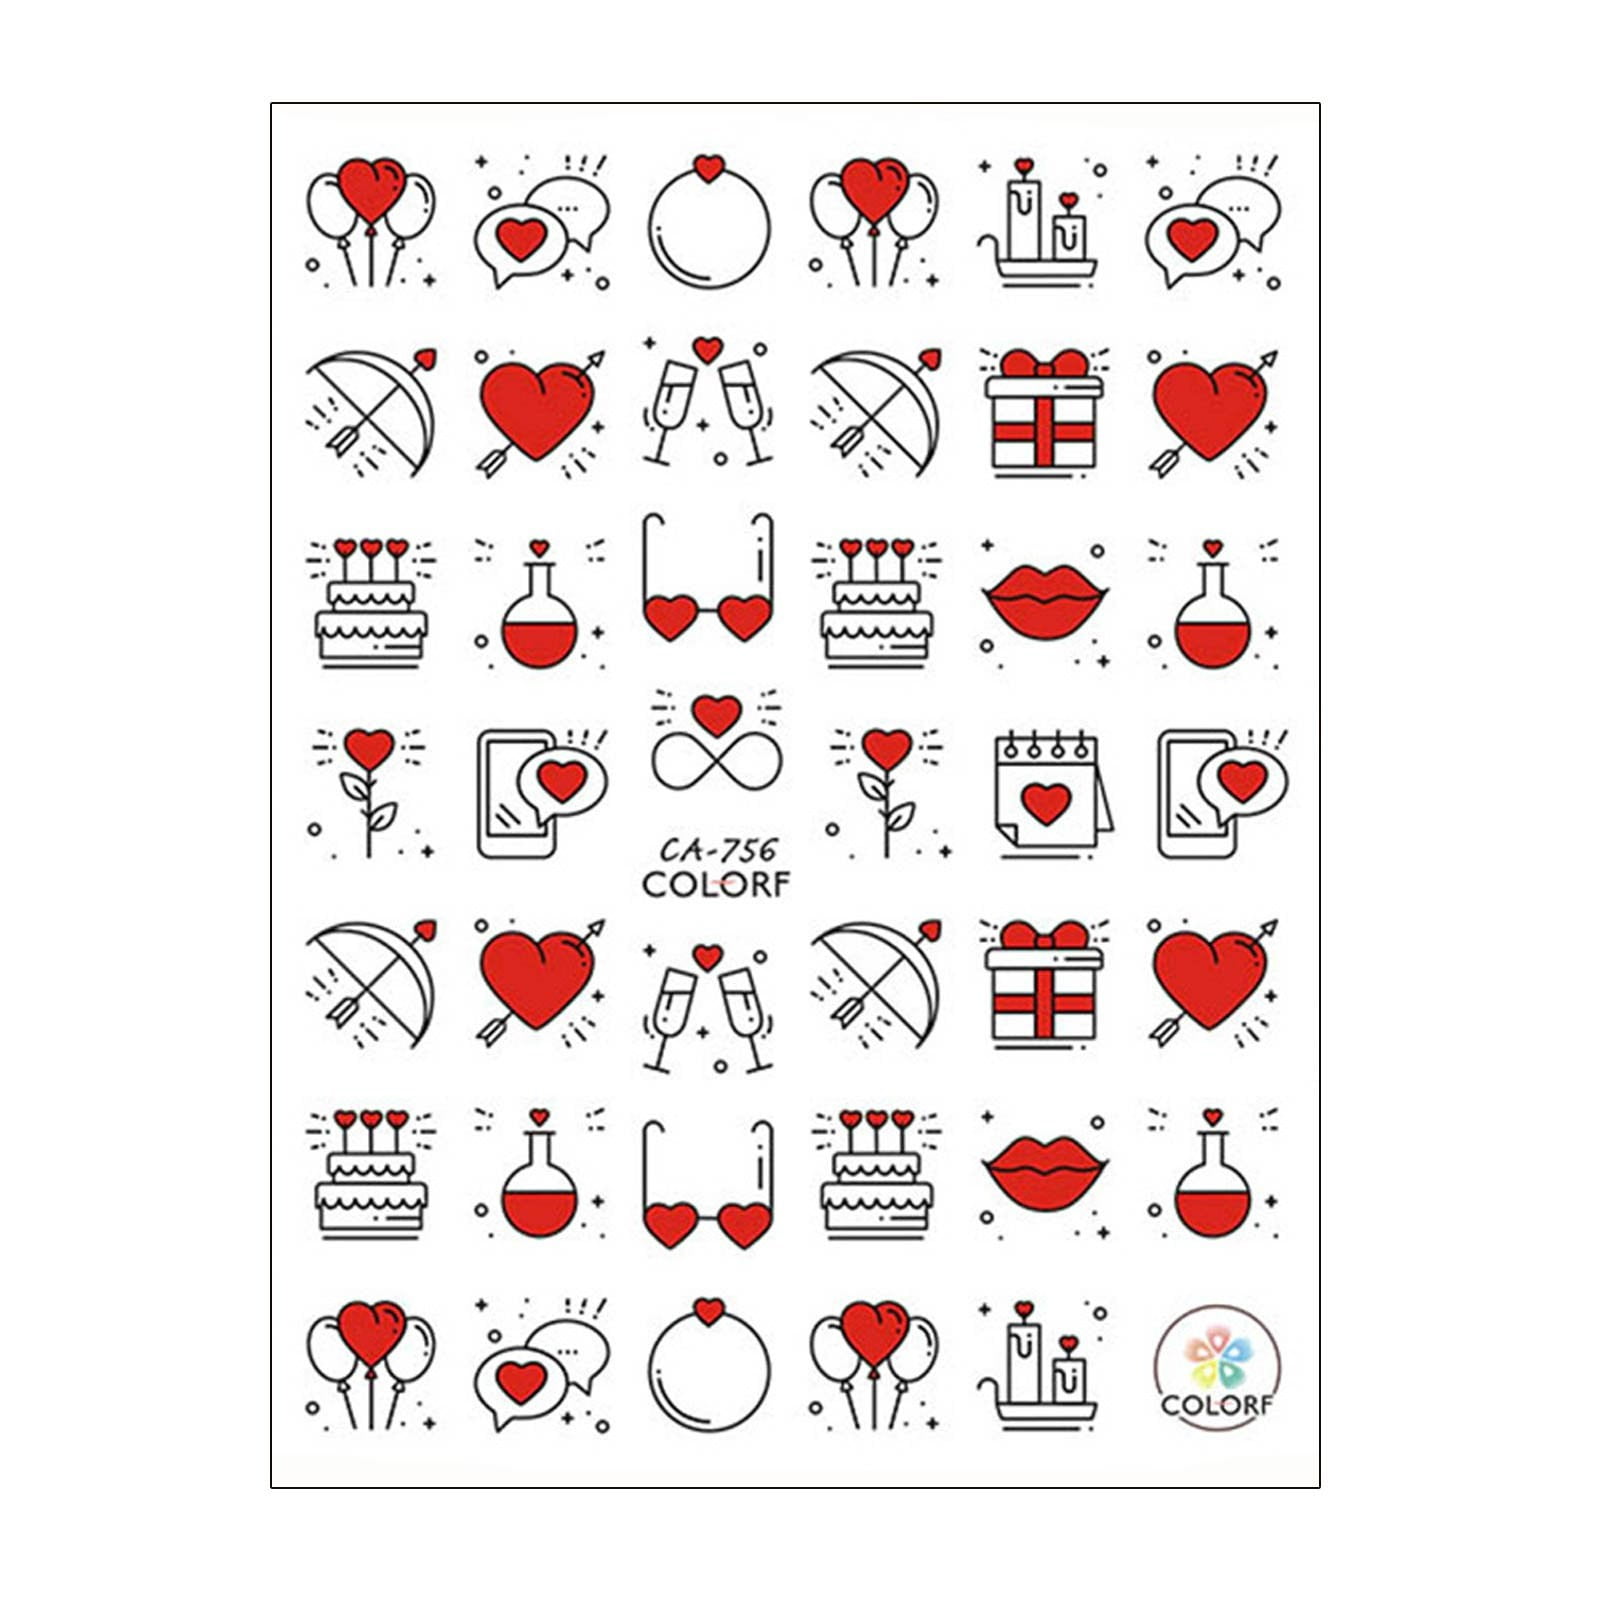 Valentines Stickers F628 – Nails Blinged Supply